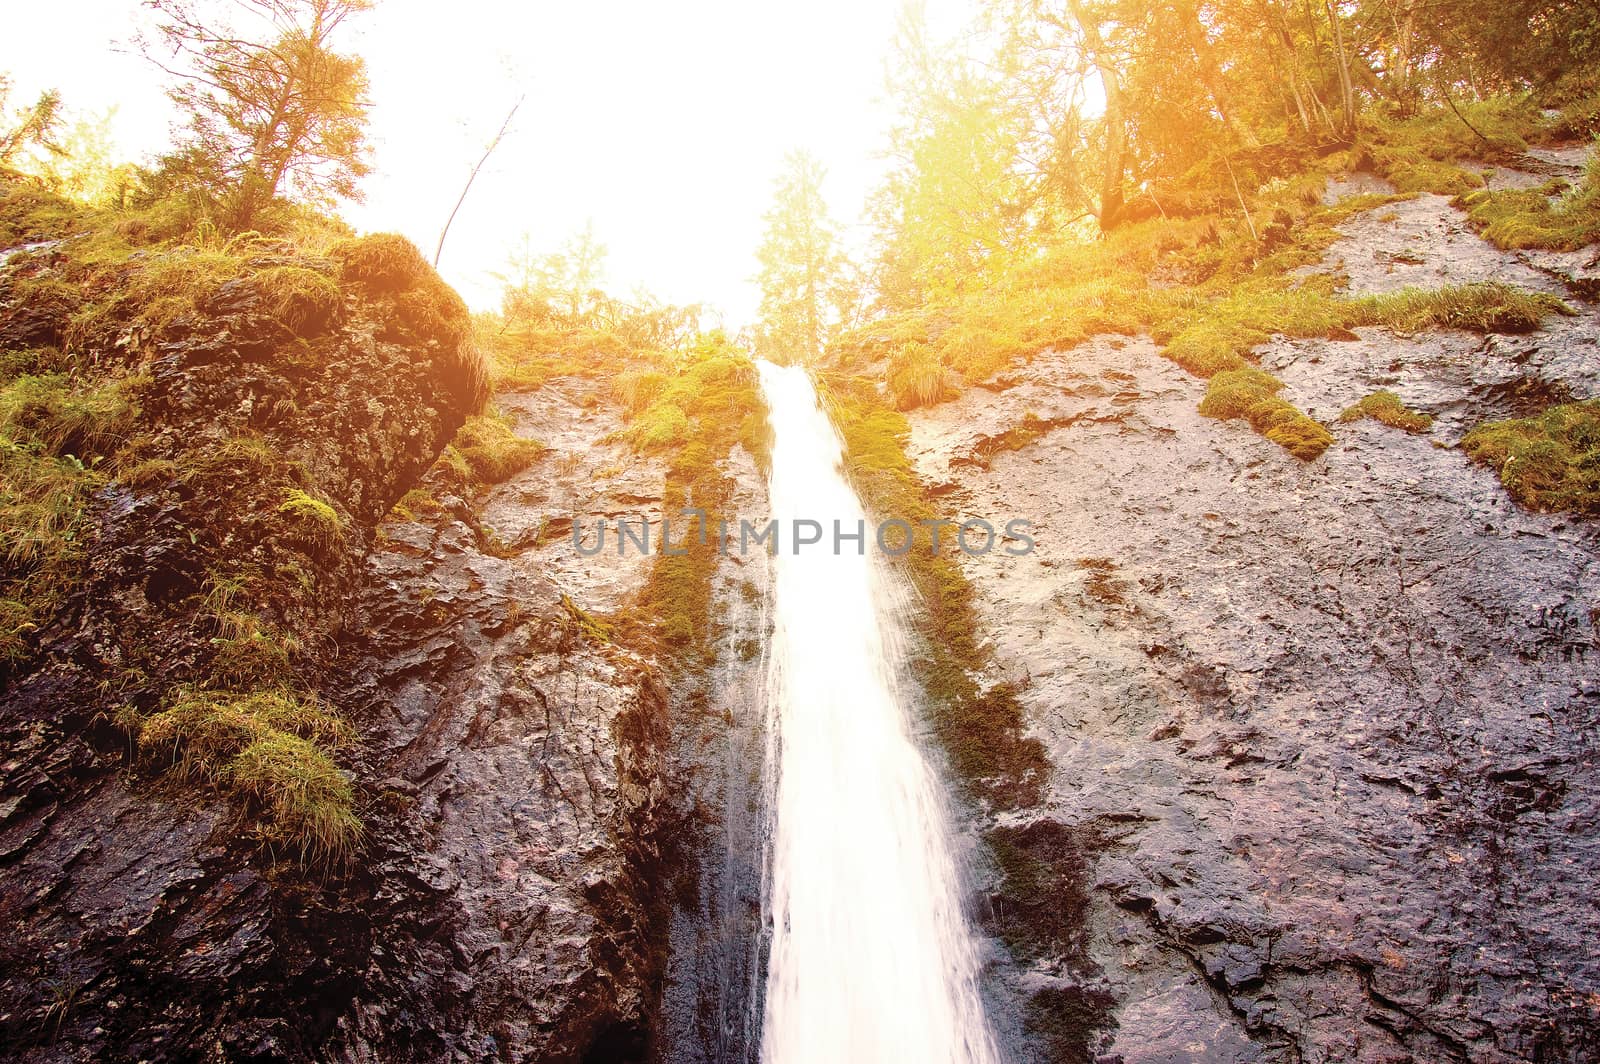 Waterfall in mountains. Nature conceptual image.